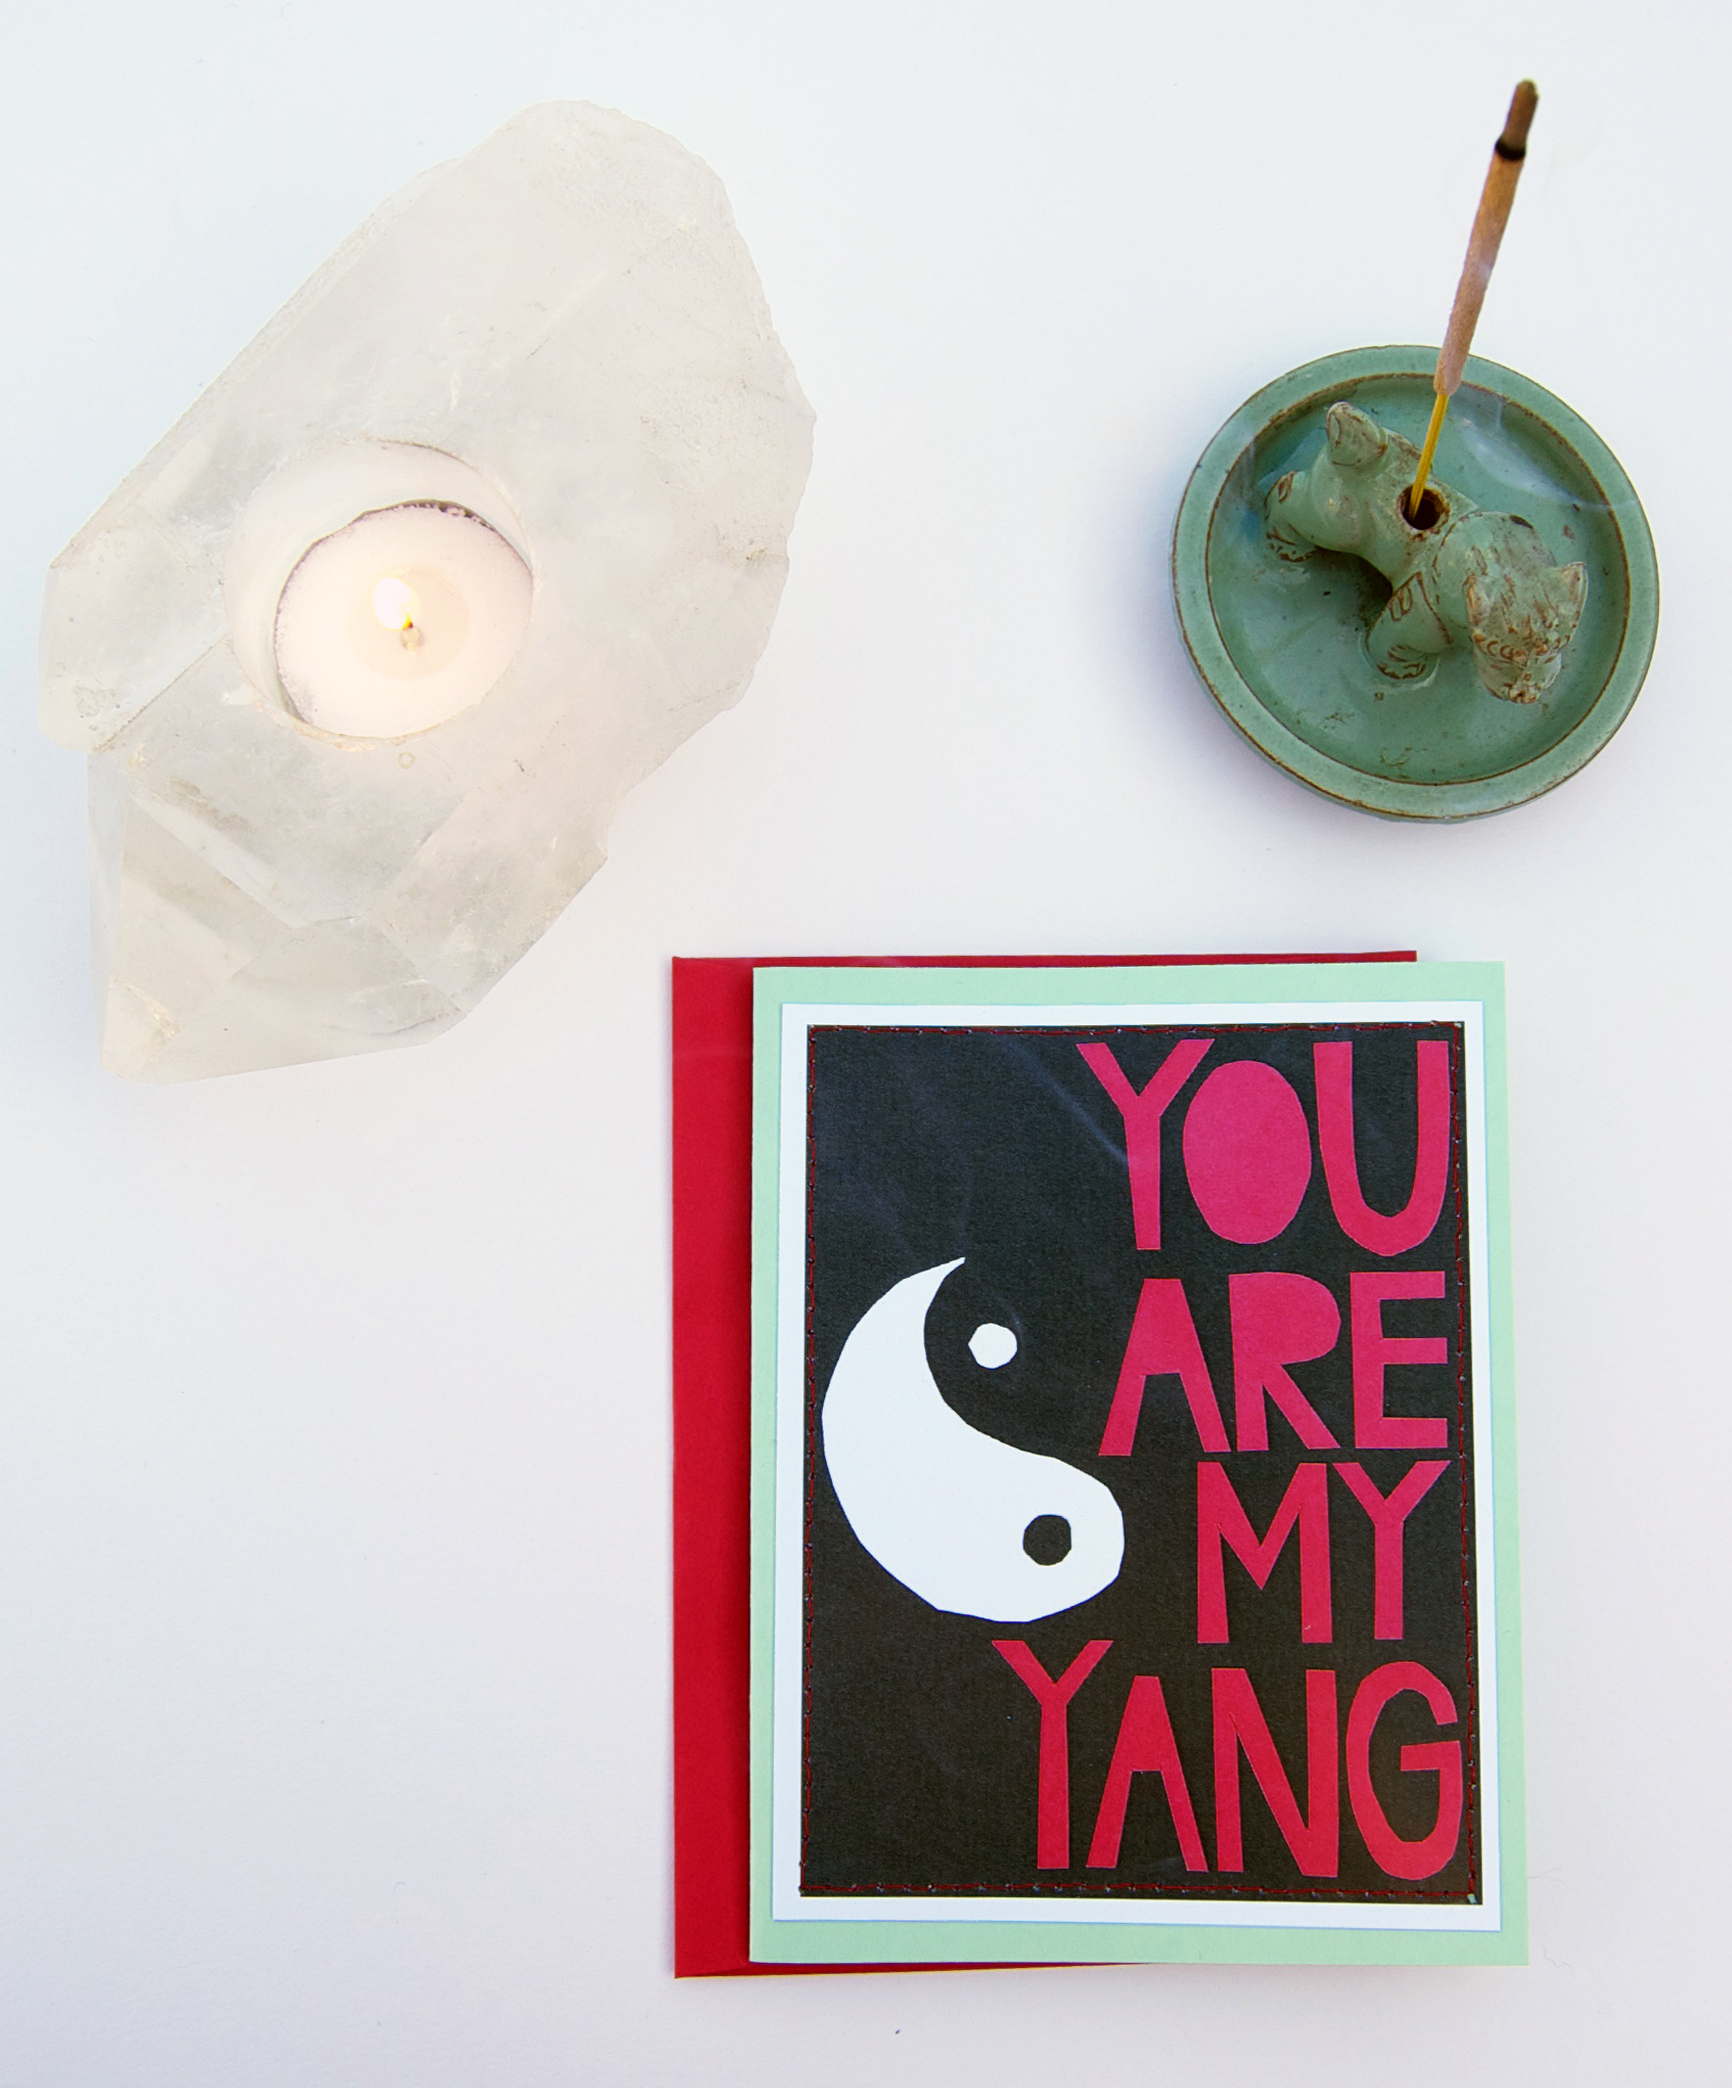 You Are My Yang Greeting Card